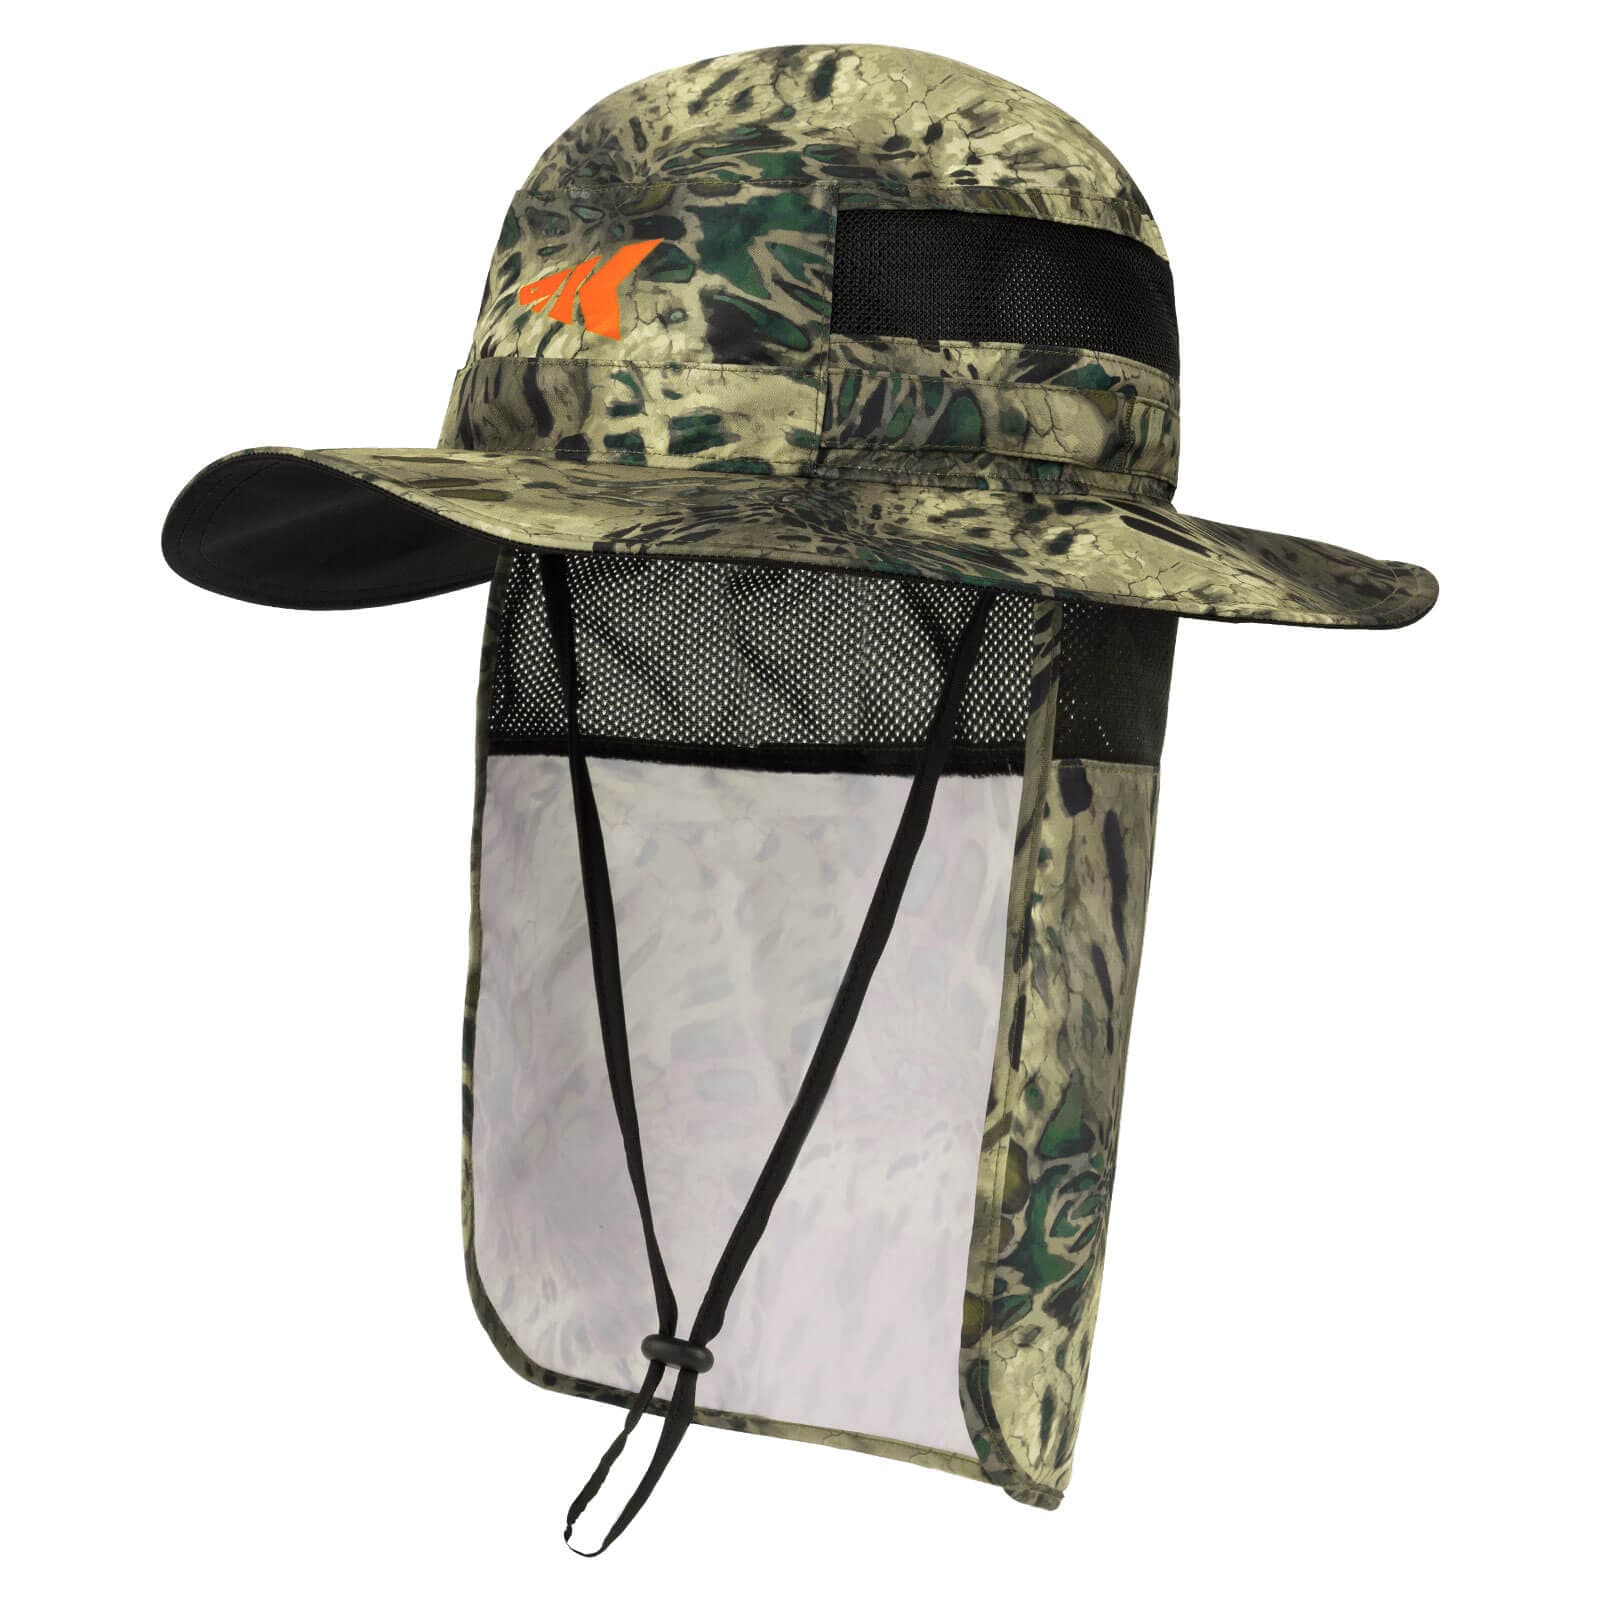 KastKing UPF 50 Boonie Hat Fishing Hat with Removable Neck Shield -  Blackout / Orange